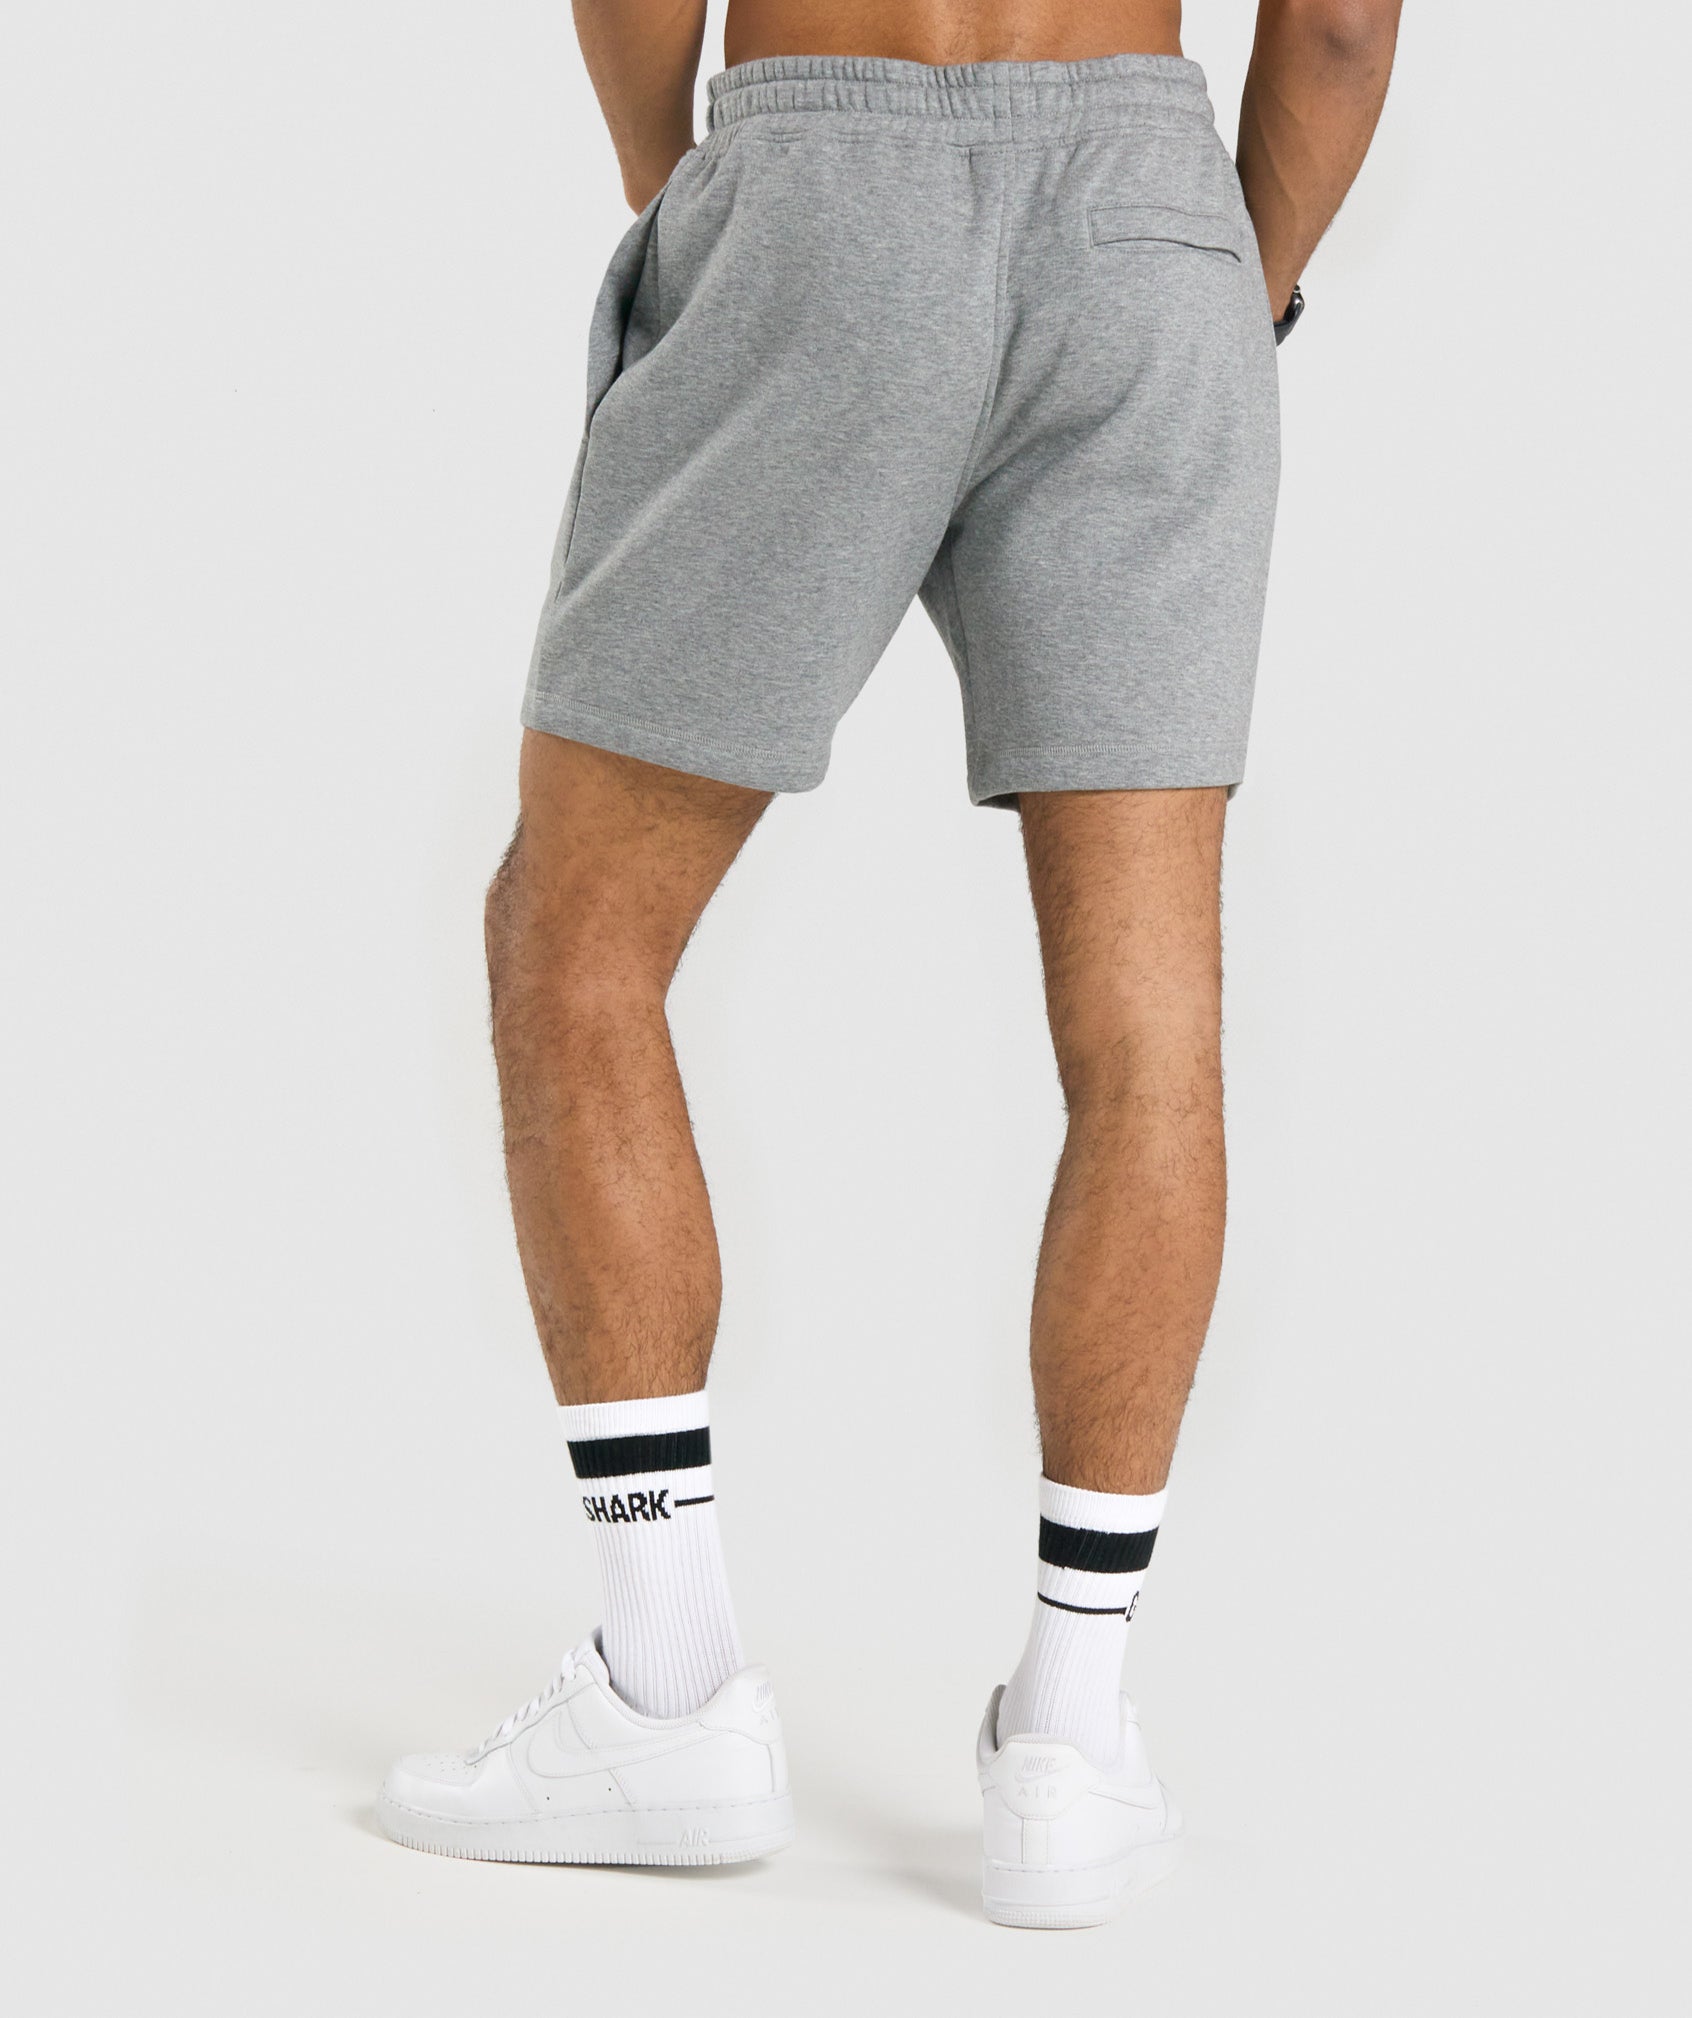 Crest Shorts in Charcoal Marl